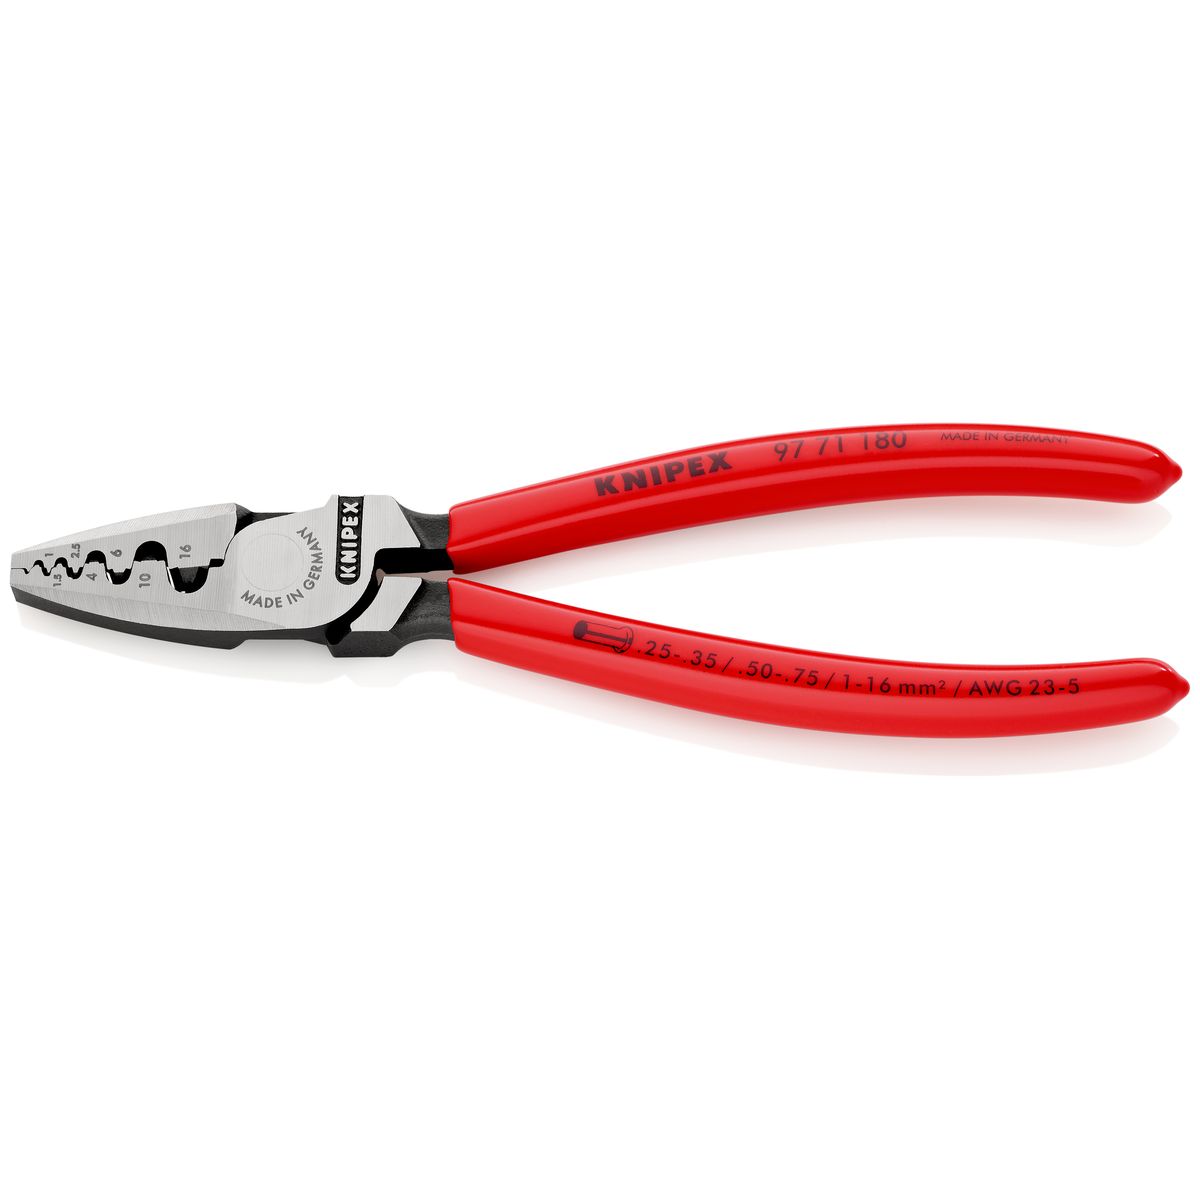 CRIMPING PLIERS F. CABLE LINKS 9771180 Knipex